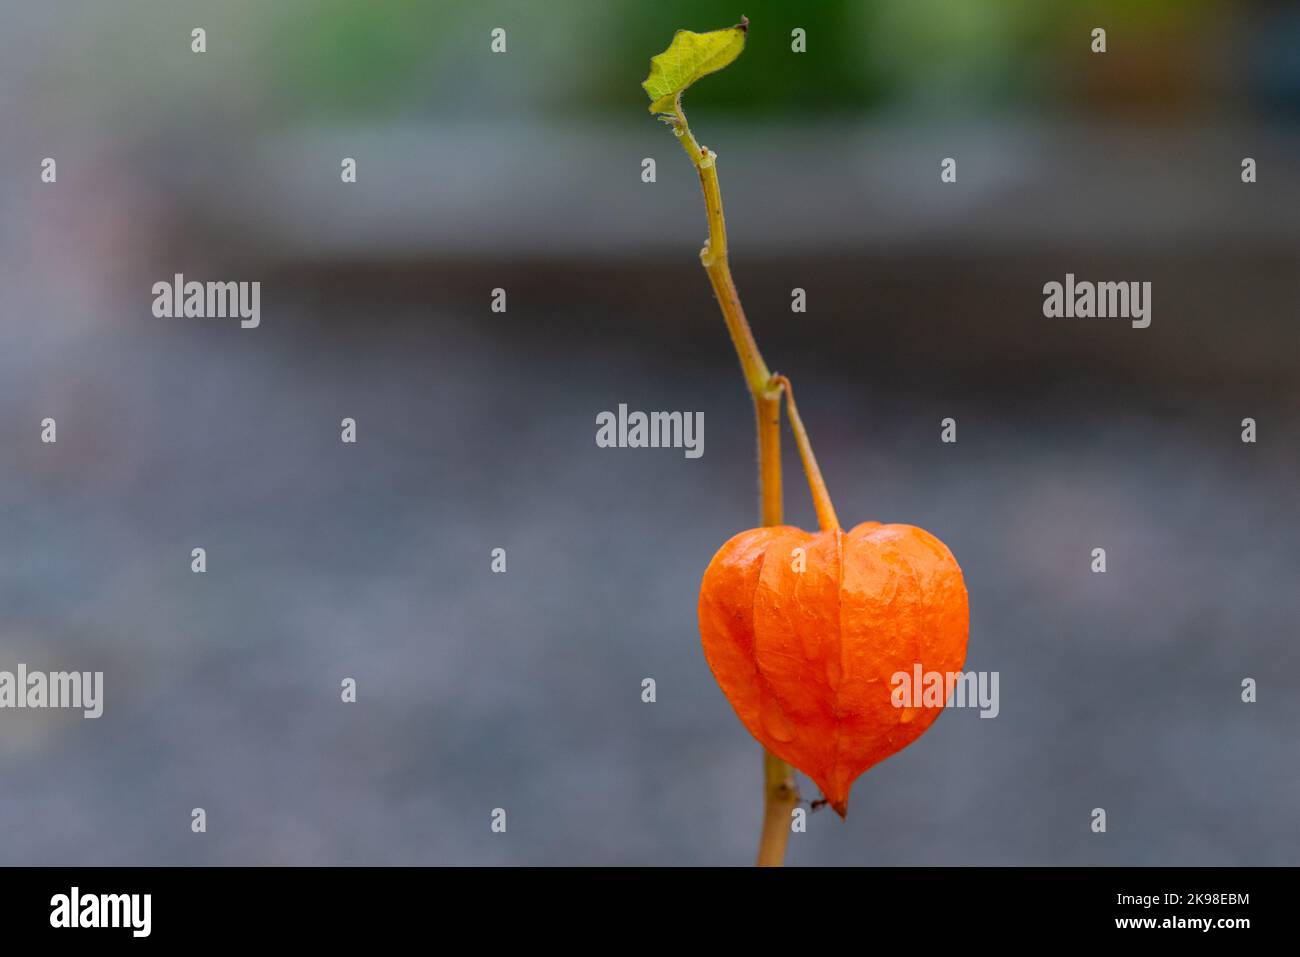 A close-up of a Chinese lantern flower known as a bladder cherry flower.  The bright orange star-shaped papery flower has thin skin.The vibrant orange Stock Photo